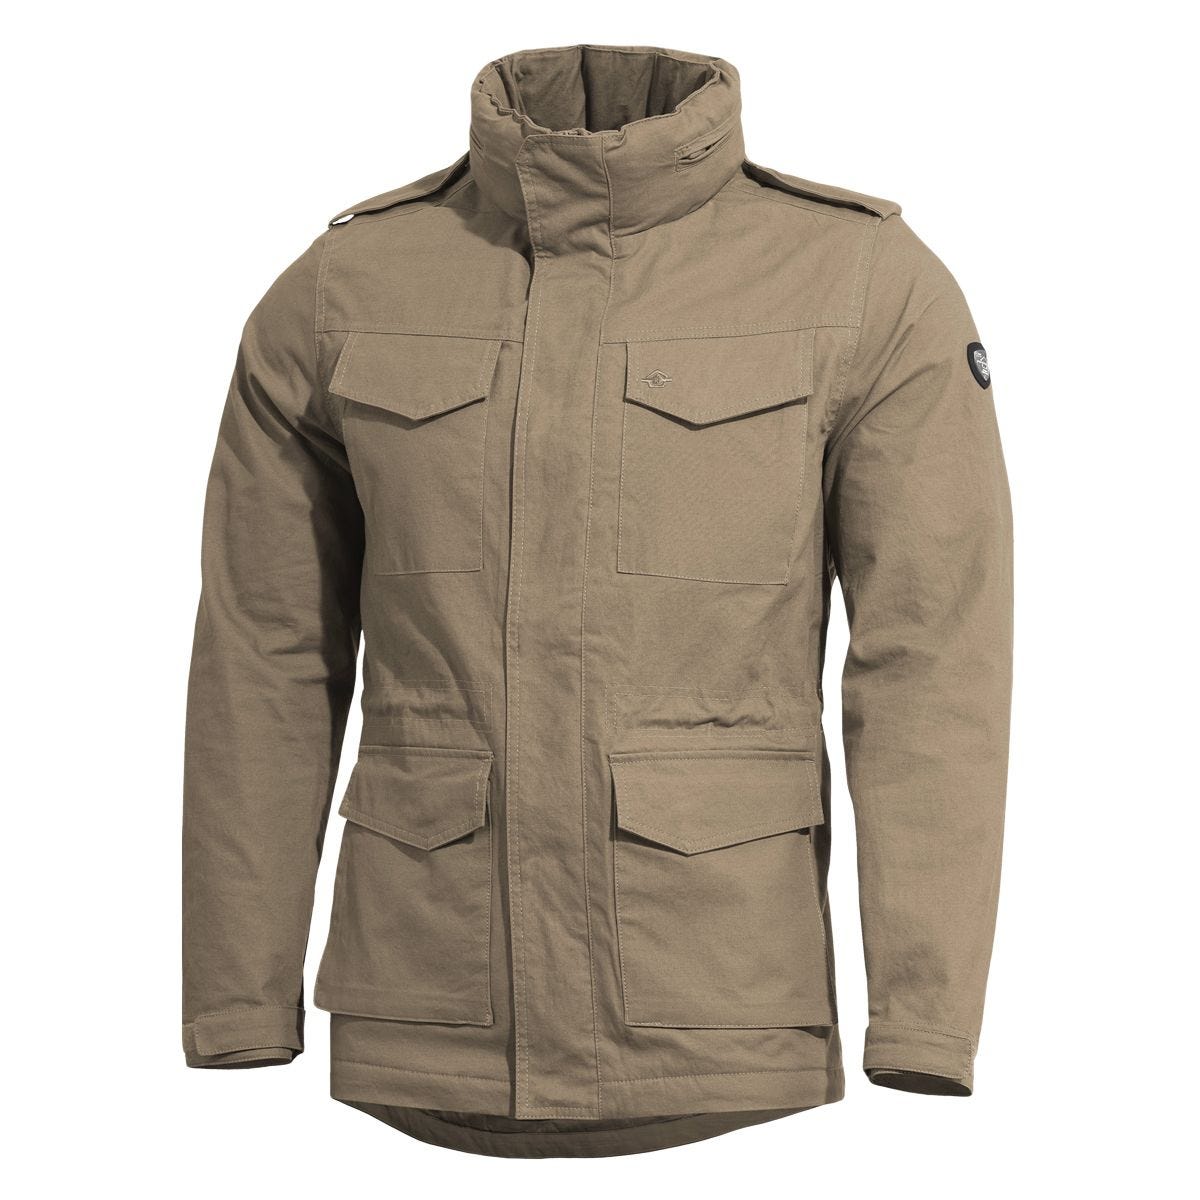 Sale - Clearance Sale Pentagon M65 2.0 Parka Coyote of exceptional quality